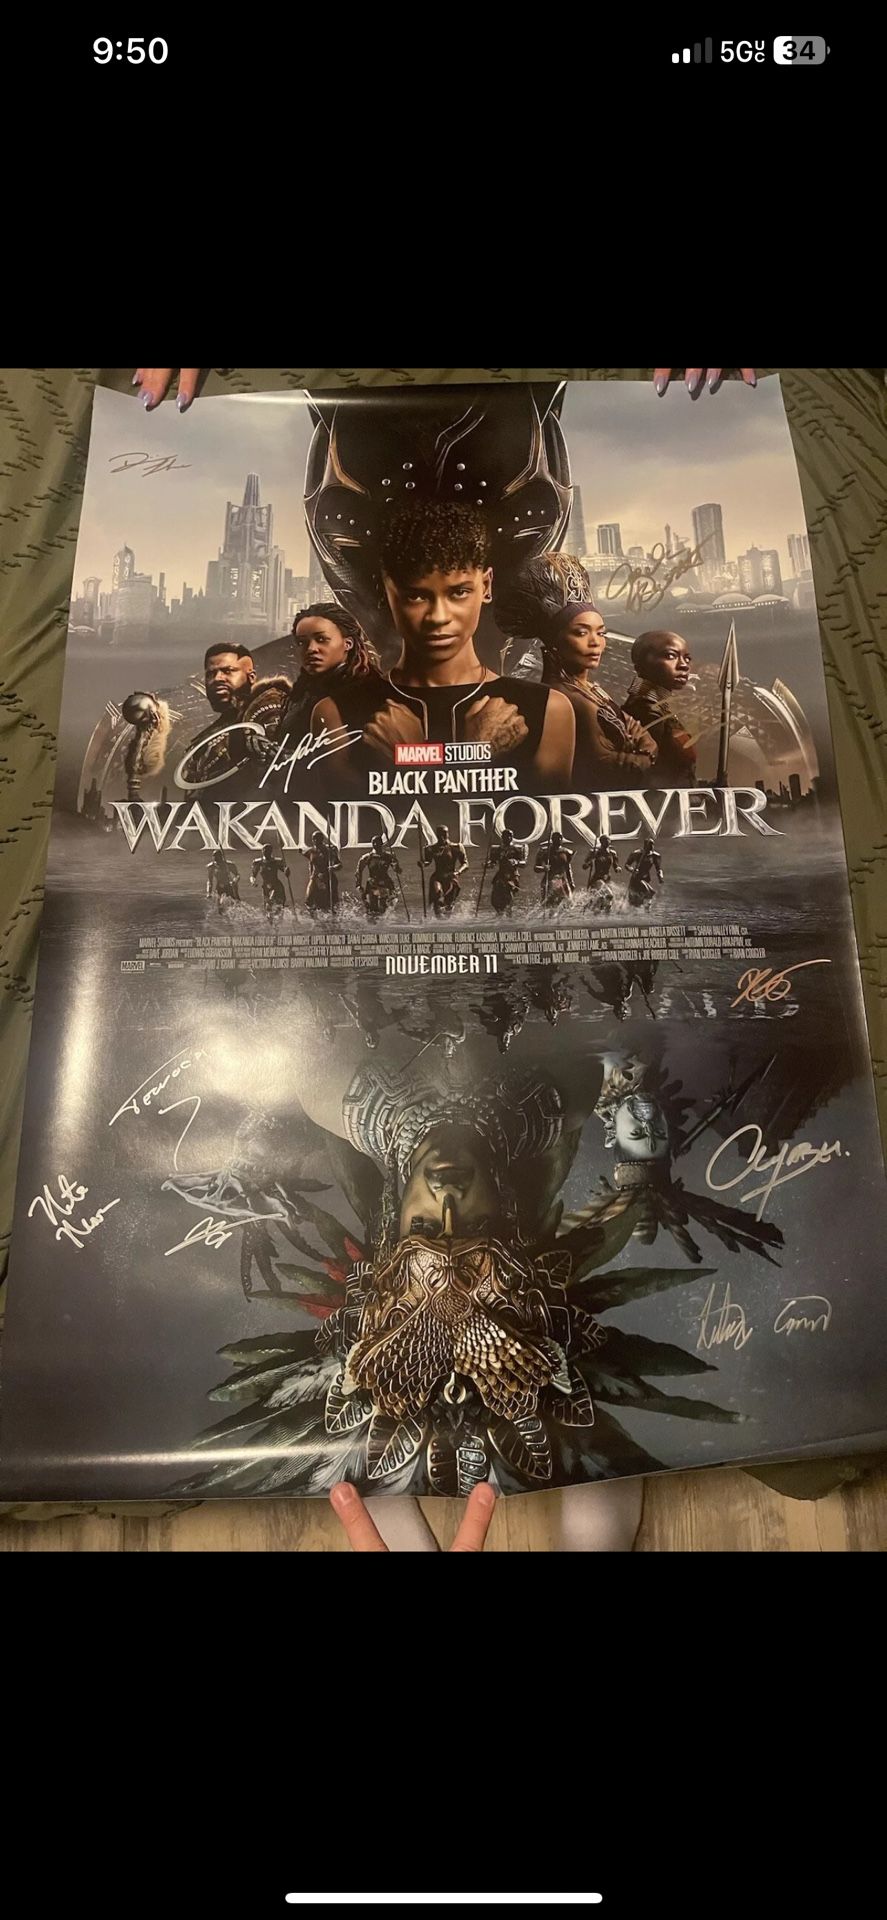 Black Panther Wakanda Forever Cast  Signed x10 27x40 Original D/S Poster